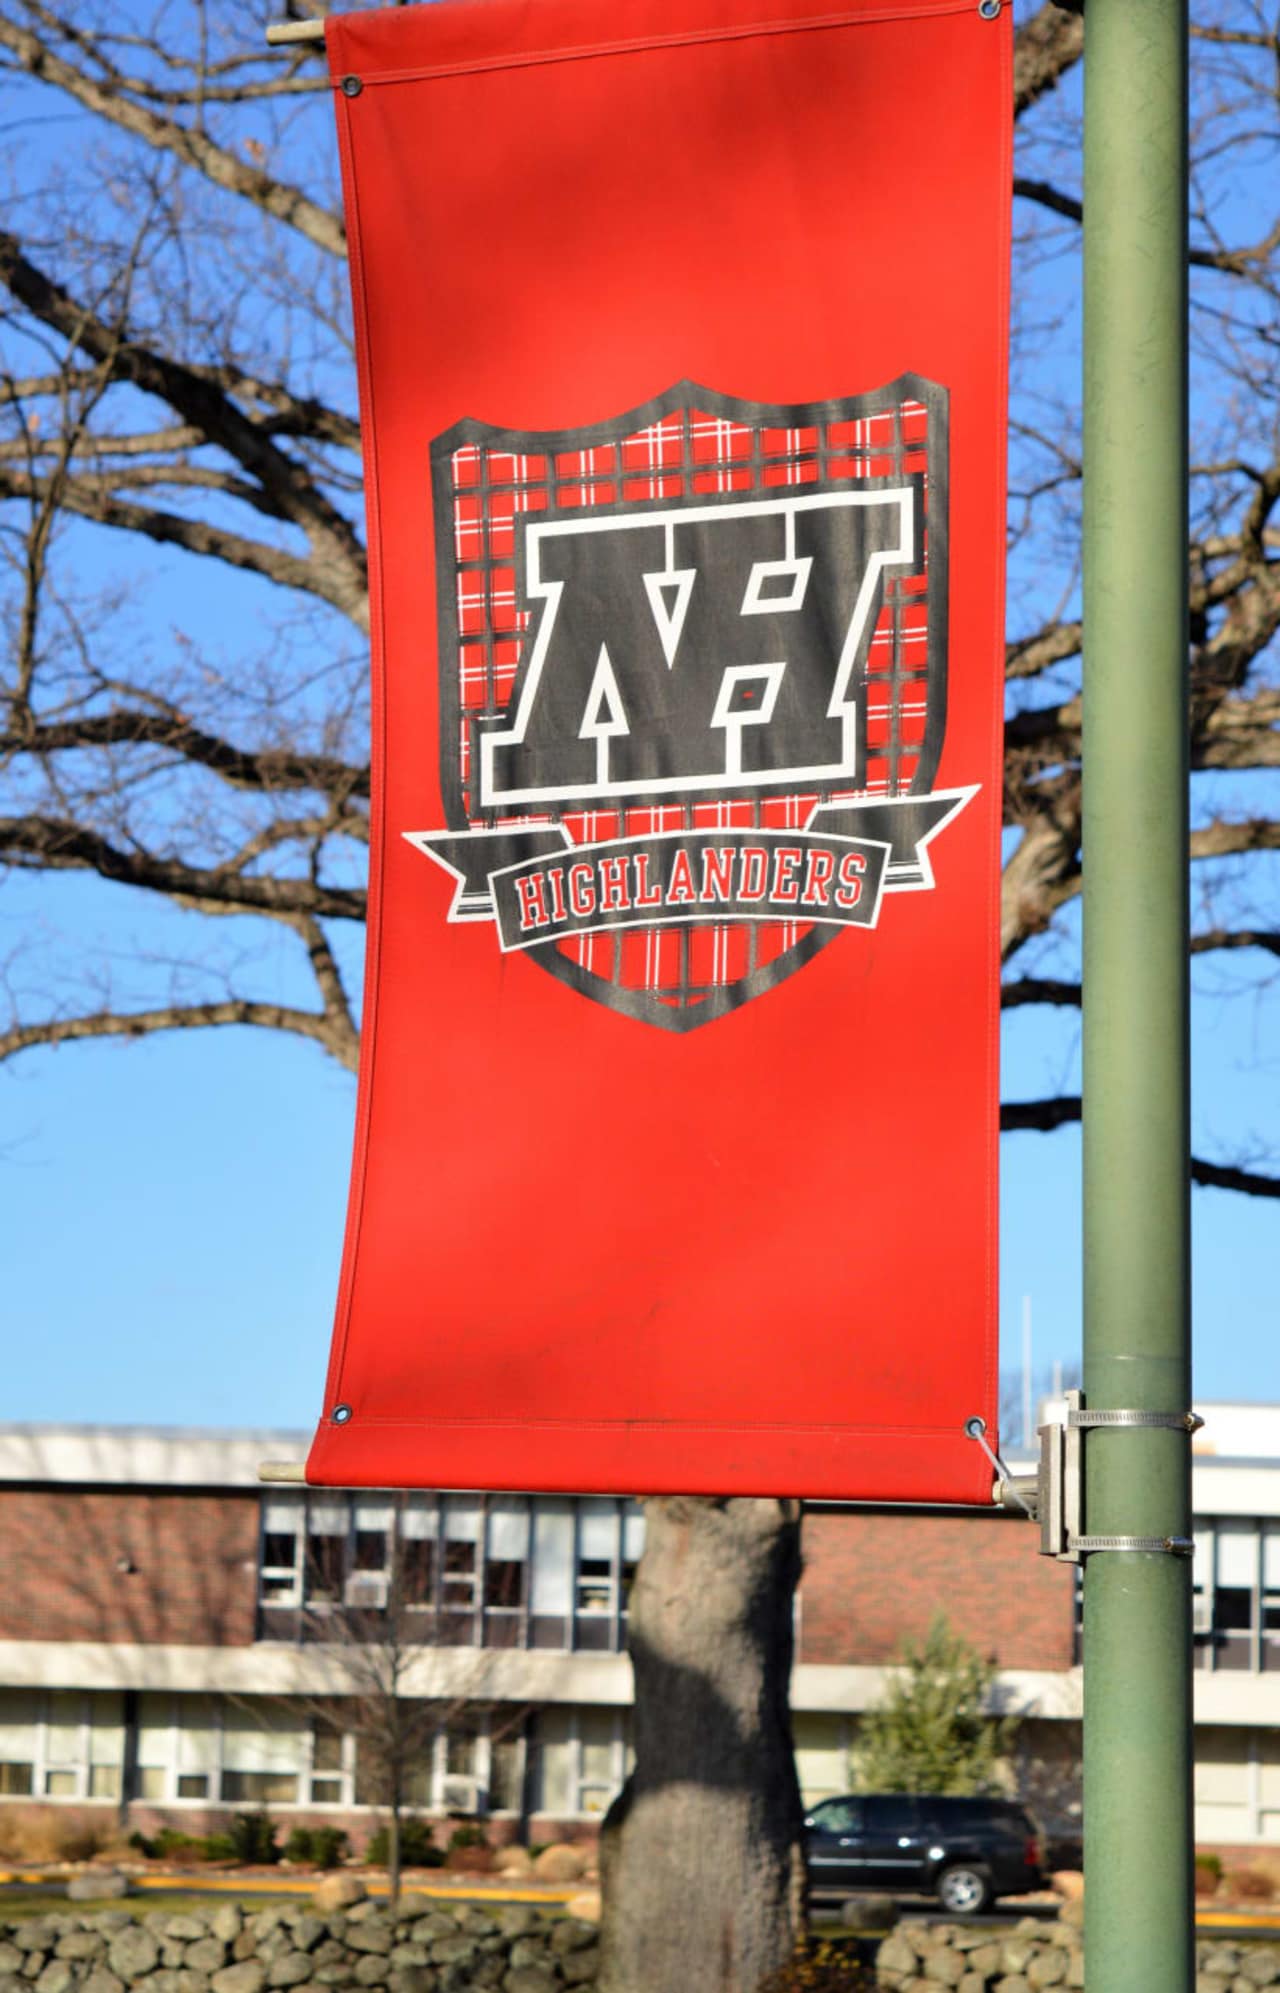 Northern Highlands Regional High School students had some of the highest SAT scores in New Jersey.